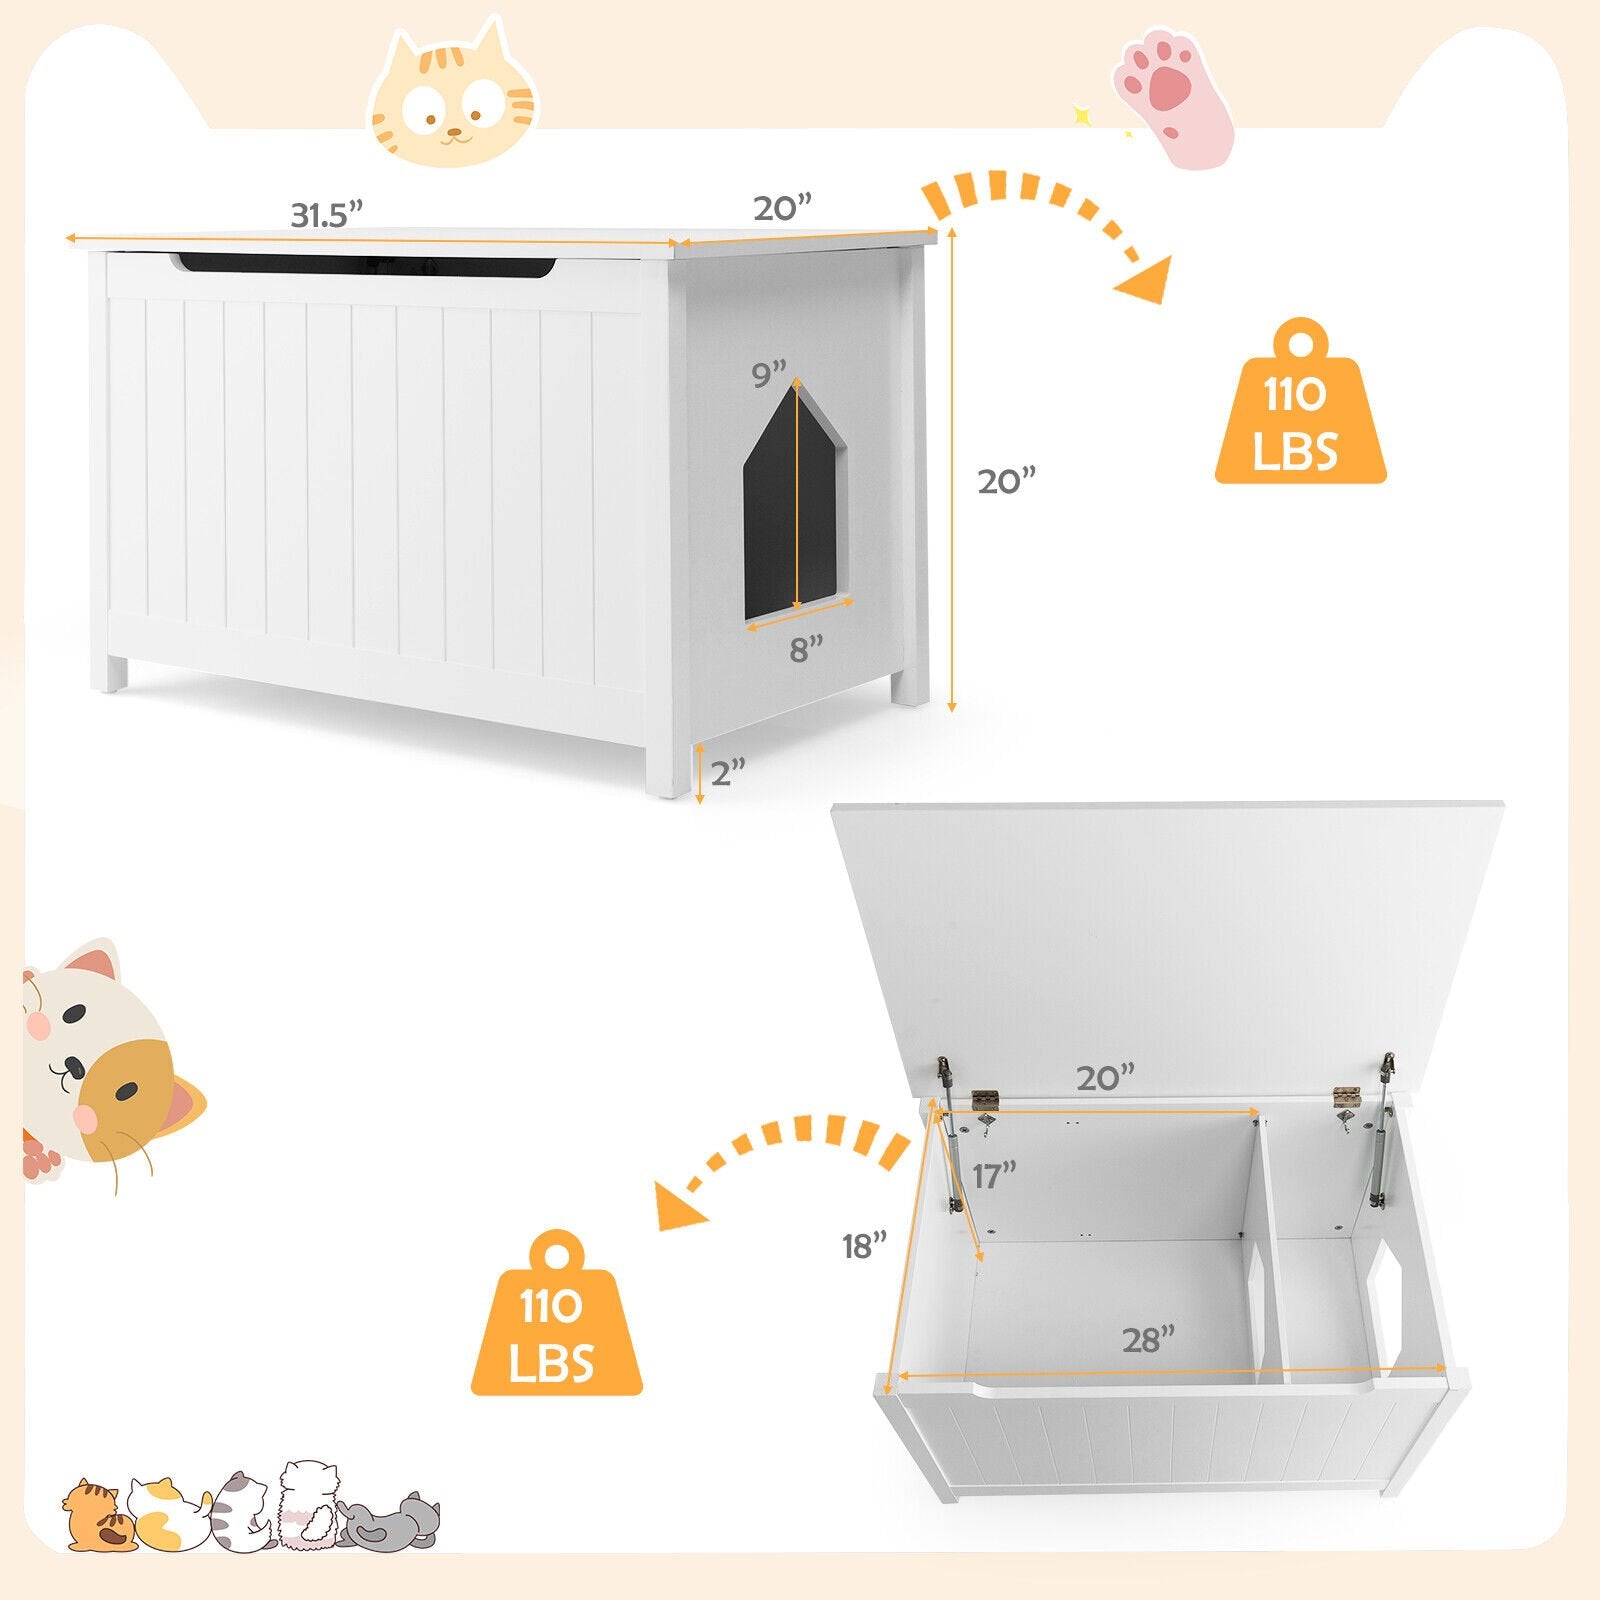 Wooden Cat Litter Box Enclosure with Top Opening Side Table, White - Gallery Canada